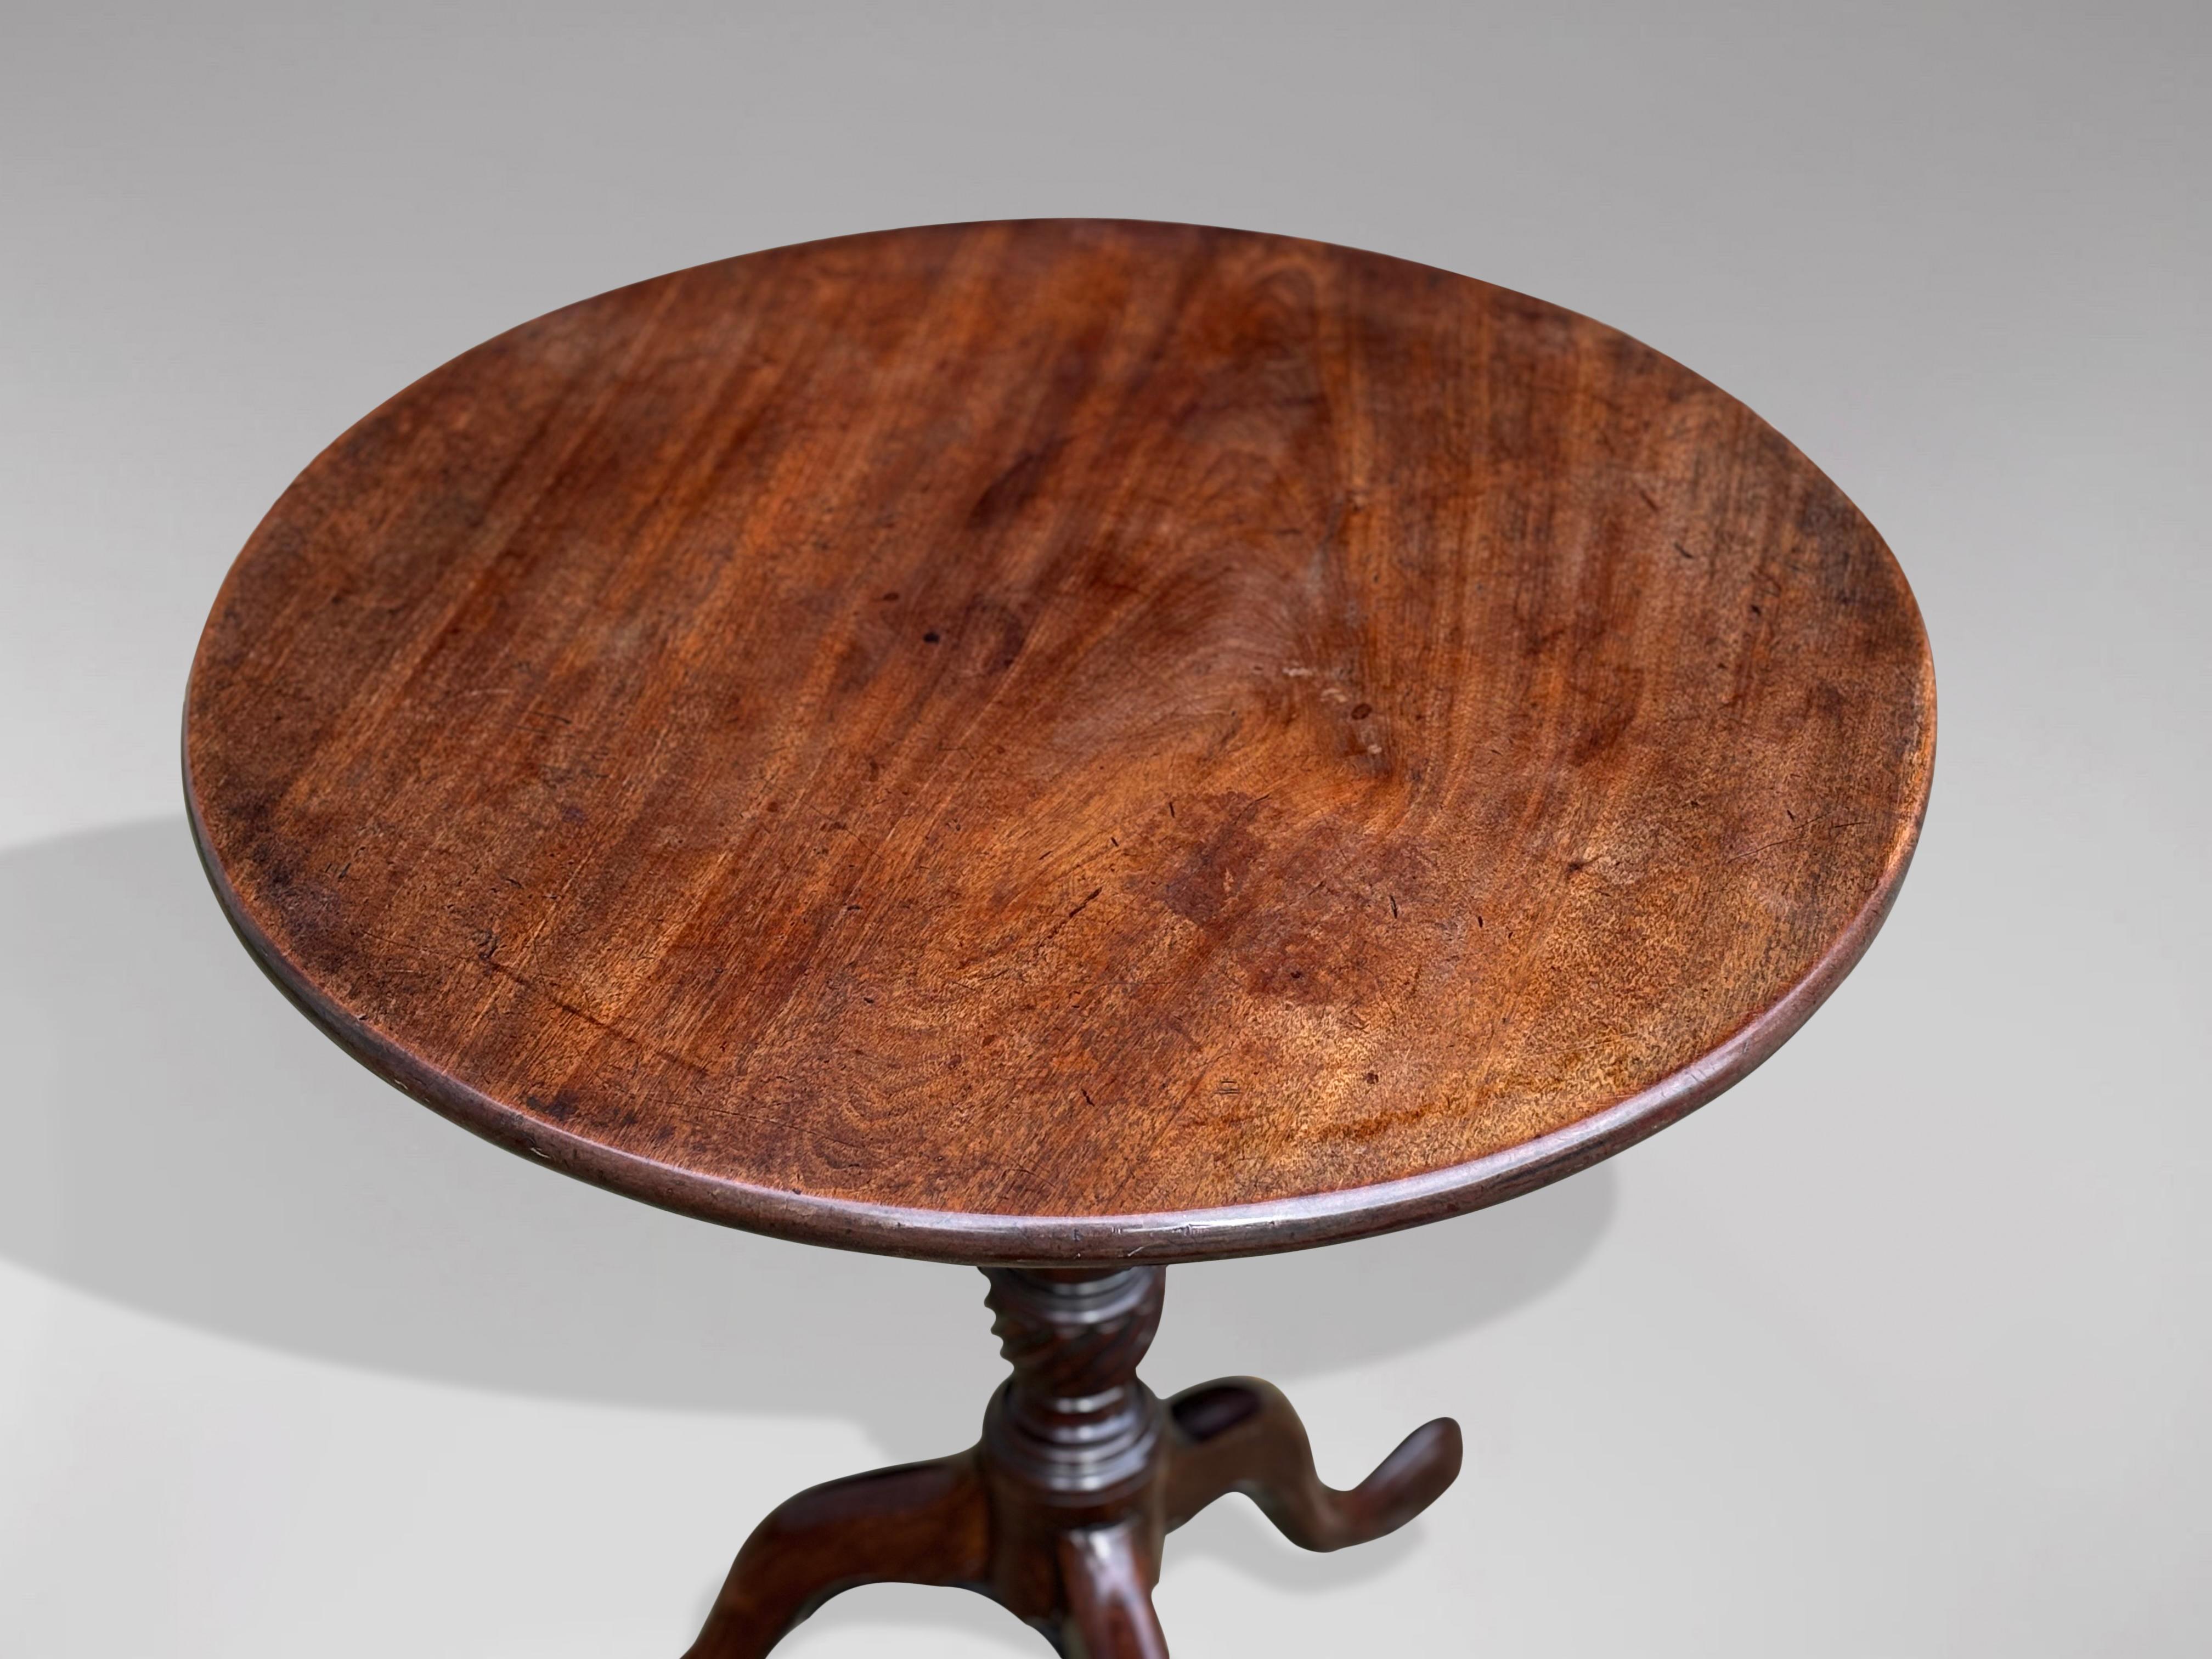 Polished 18th Century George III Period Mahogany Tilt-Top Tripod Table For Sale